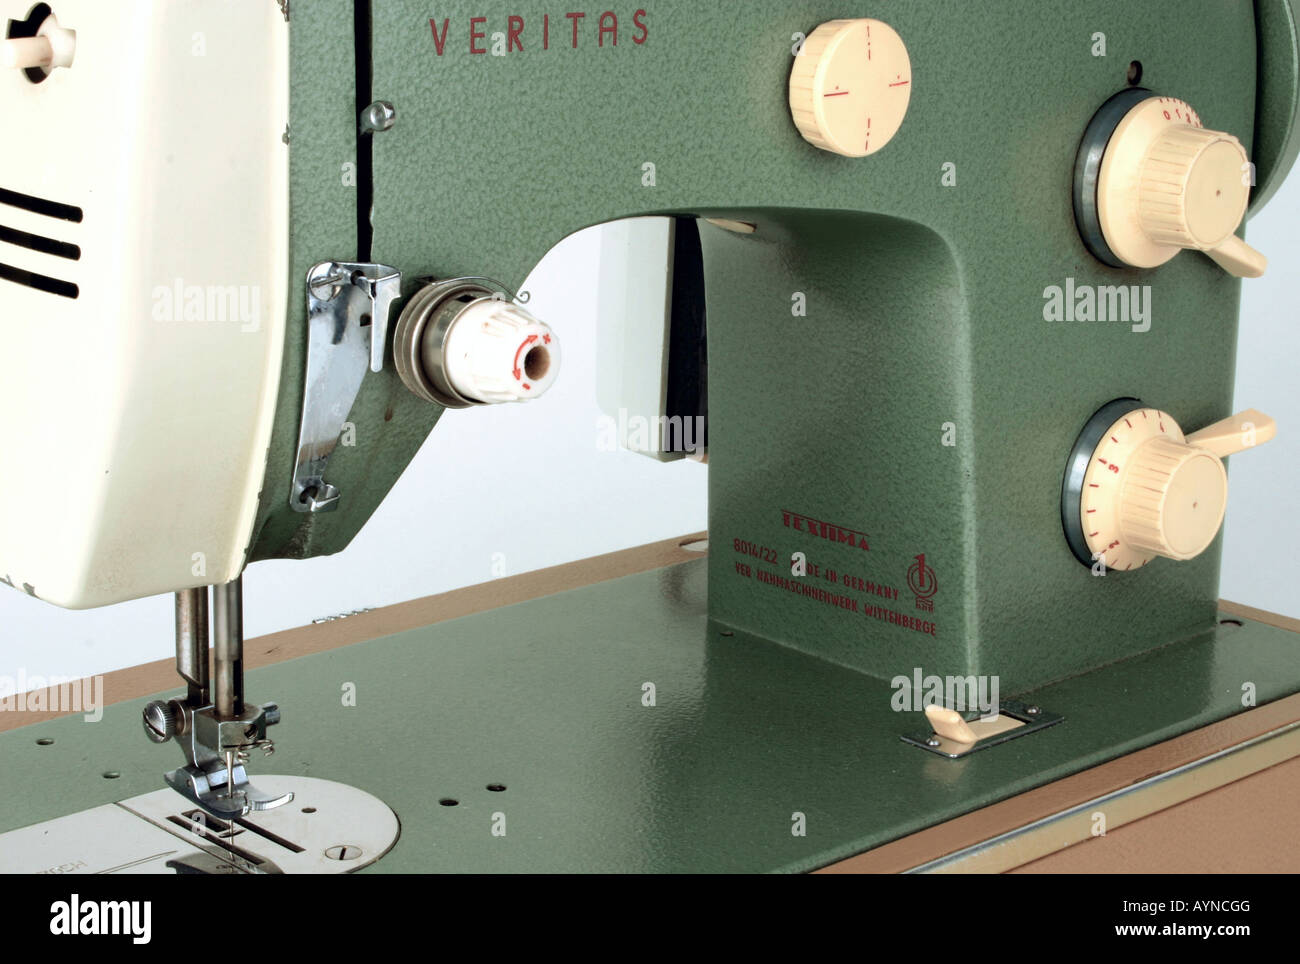 household, household appliances, electrical sewing machine Veritas 8014/22,  detail, produced by VEB Textima Naehmaschinenwerk Wittenberge, GDR, 1960s  Stock Photo - Alamy